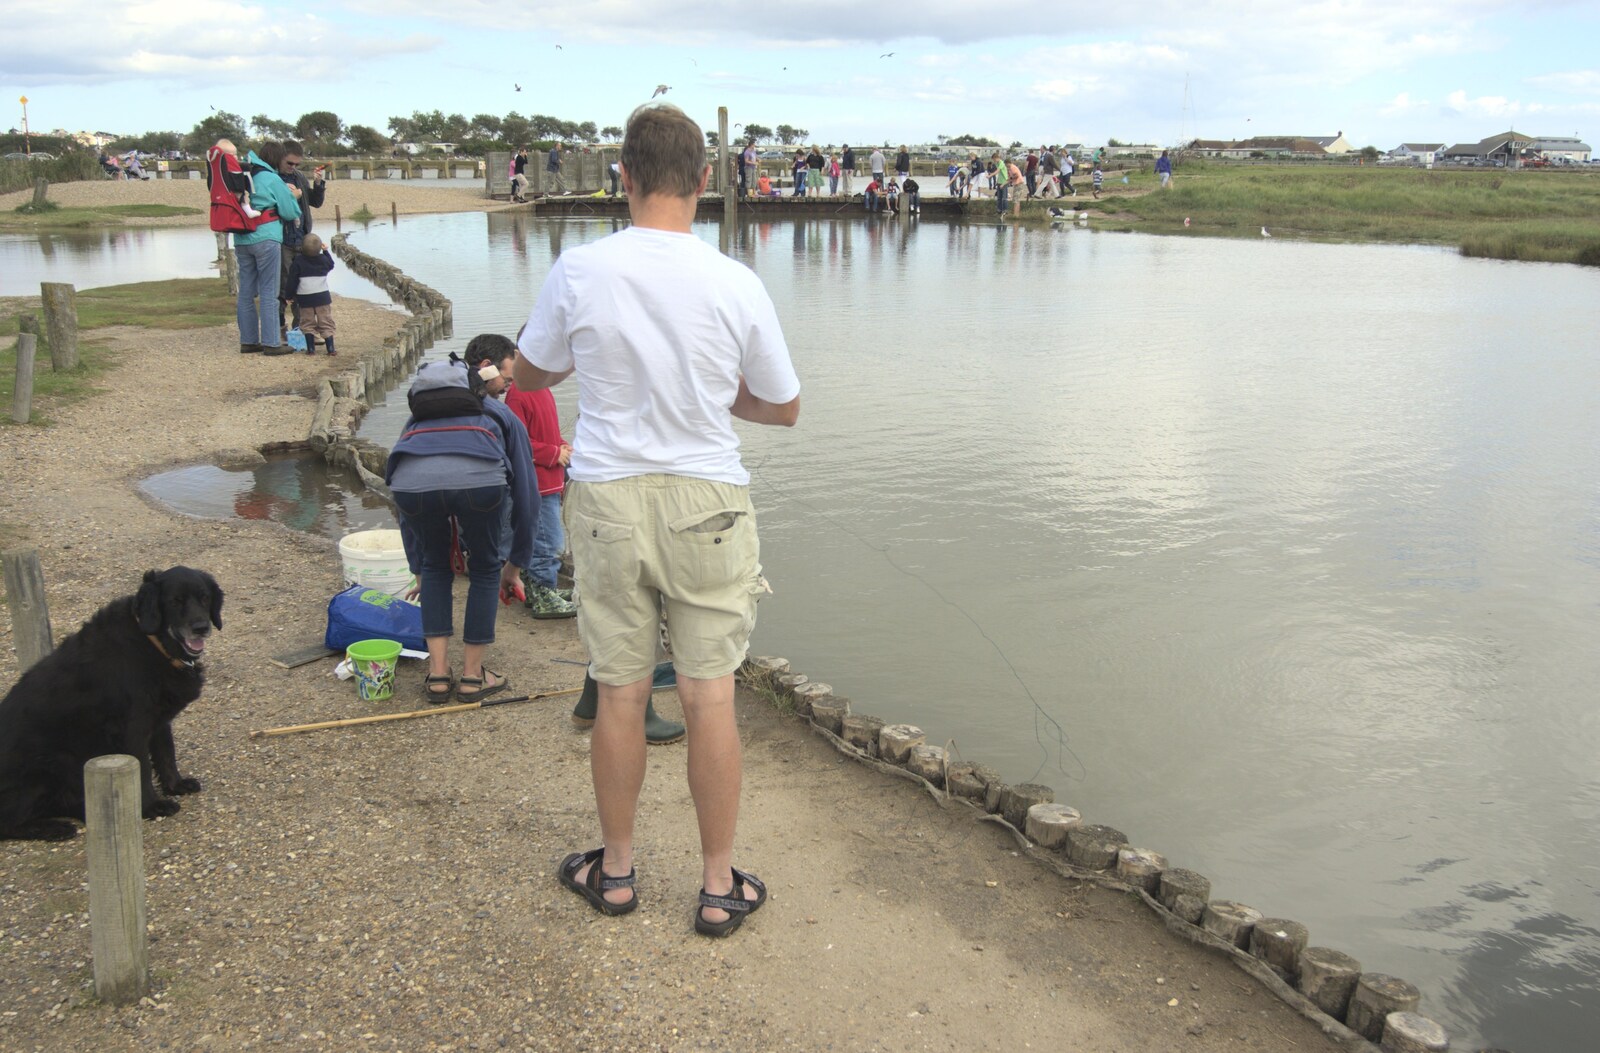 A Trip to Walberswick, Suffolk - 12th September 2010: Down by the river in Walberswick